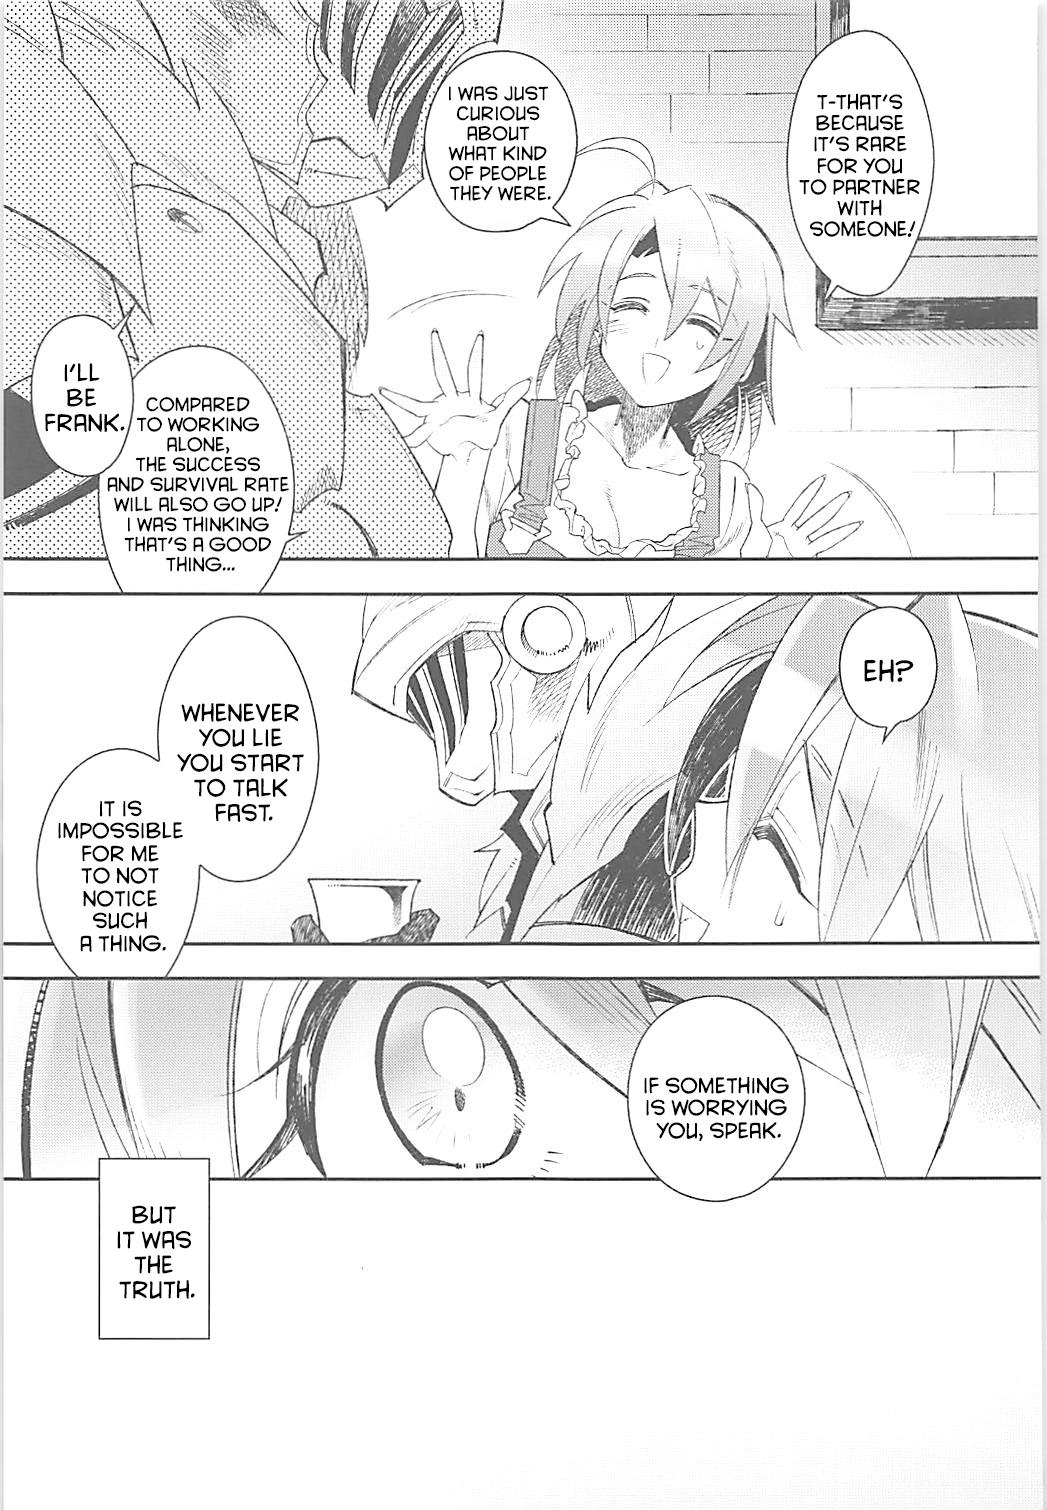 Housewife Harvest Moon - Goblin slayer Unshaved - Page 8